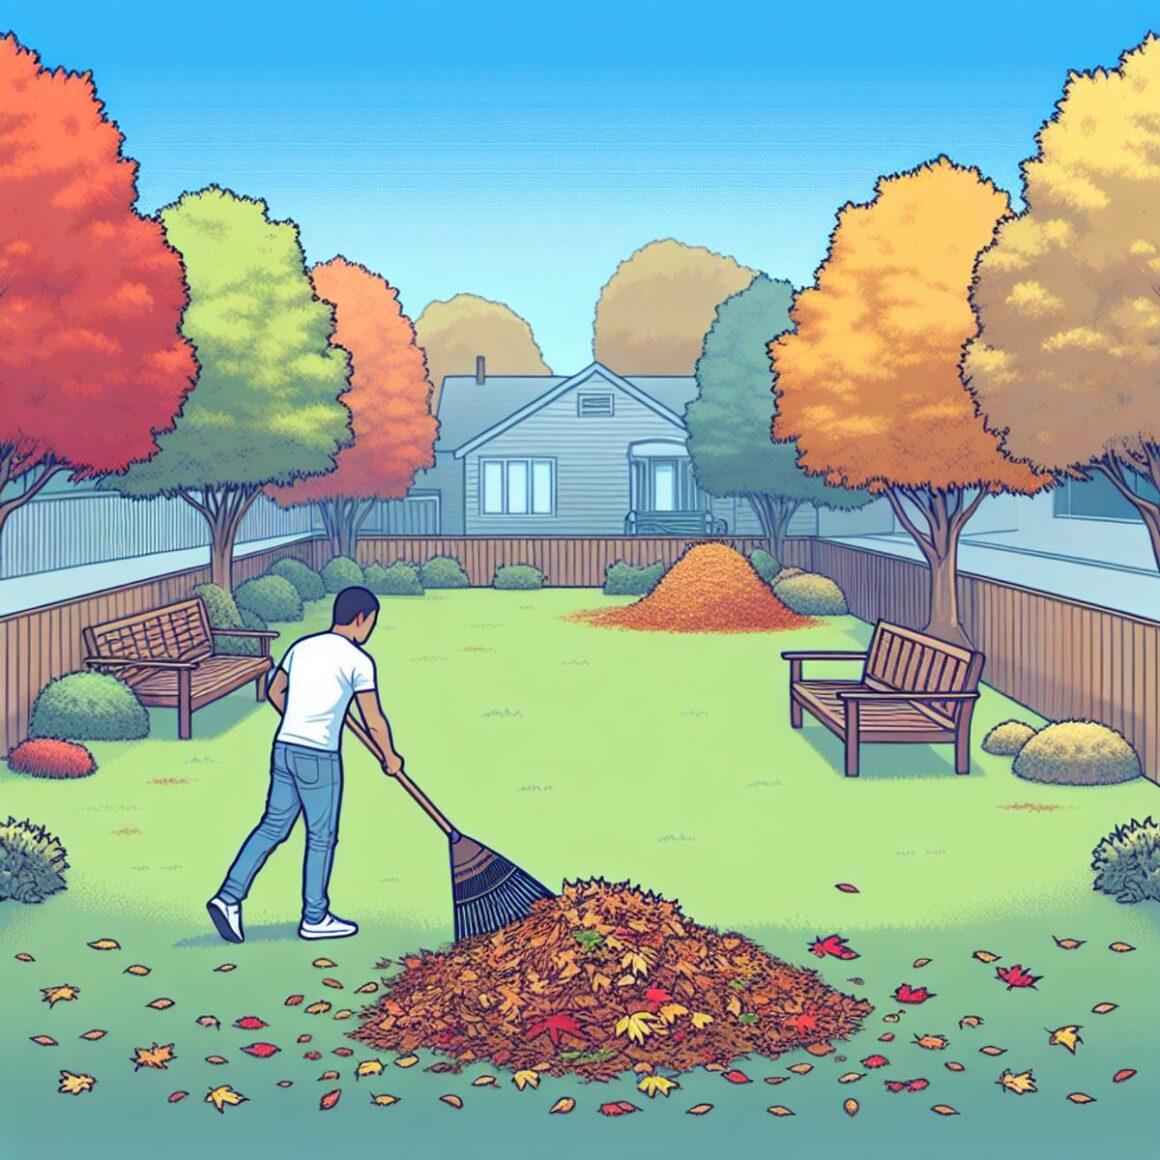 A person of Hispanic descent rakes fallen leaves in a tidy and well-kept backyard, surrounded by autumn colors and a well-manicured lawn.